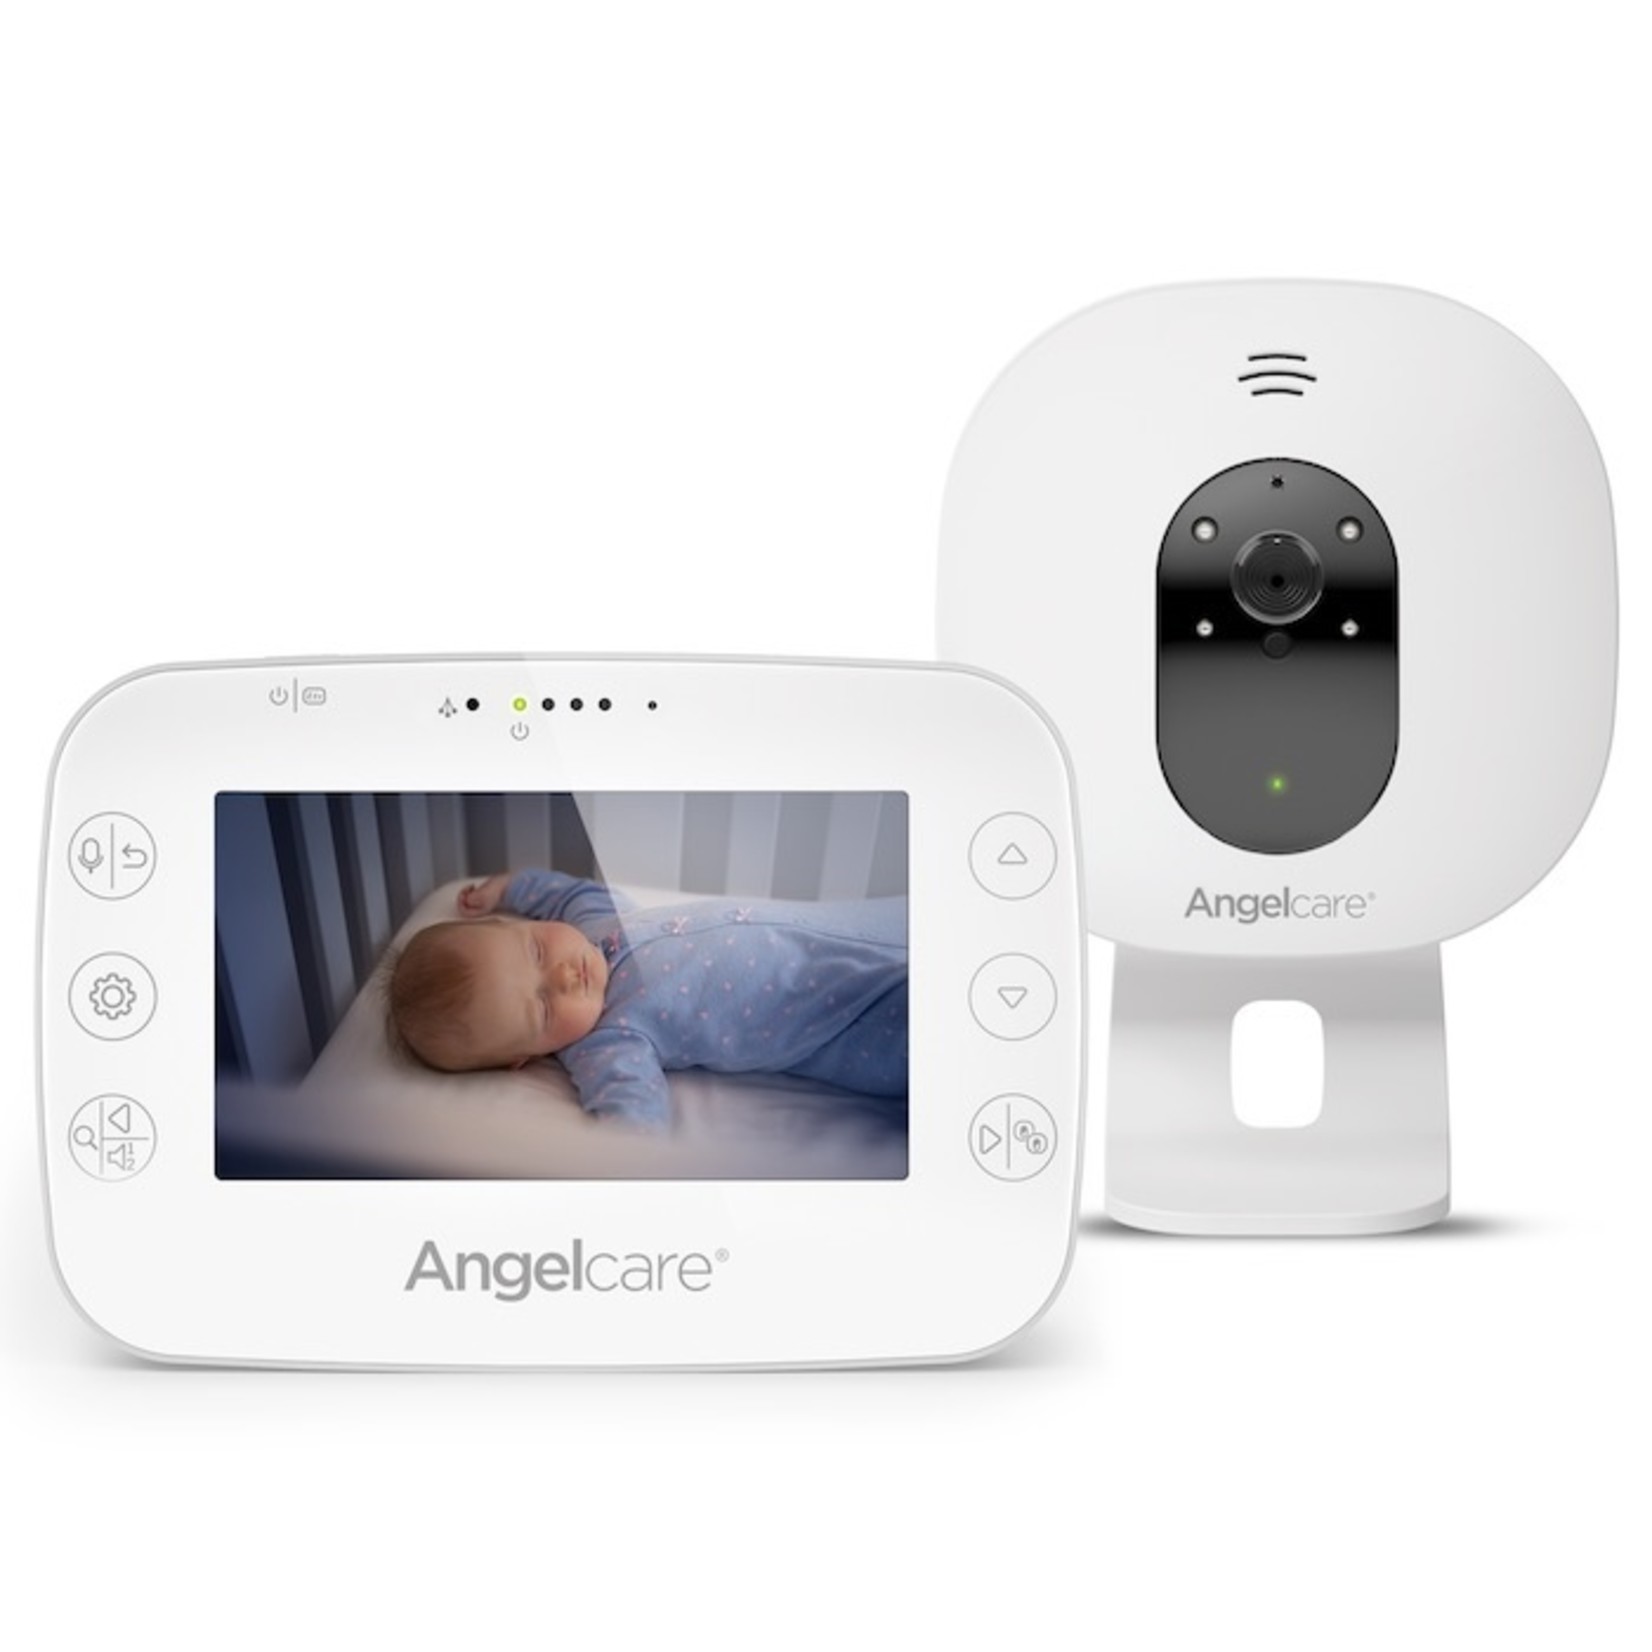 Angel Care Angelcare Video& sound monitor 4.3" screen Ac320